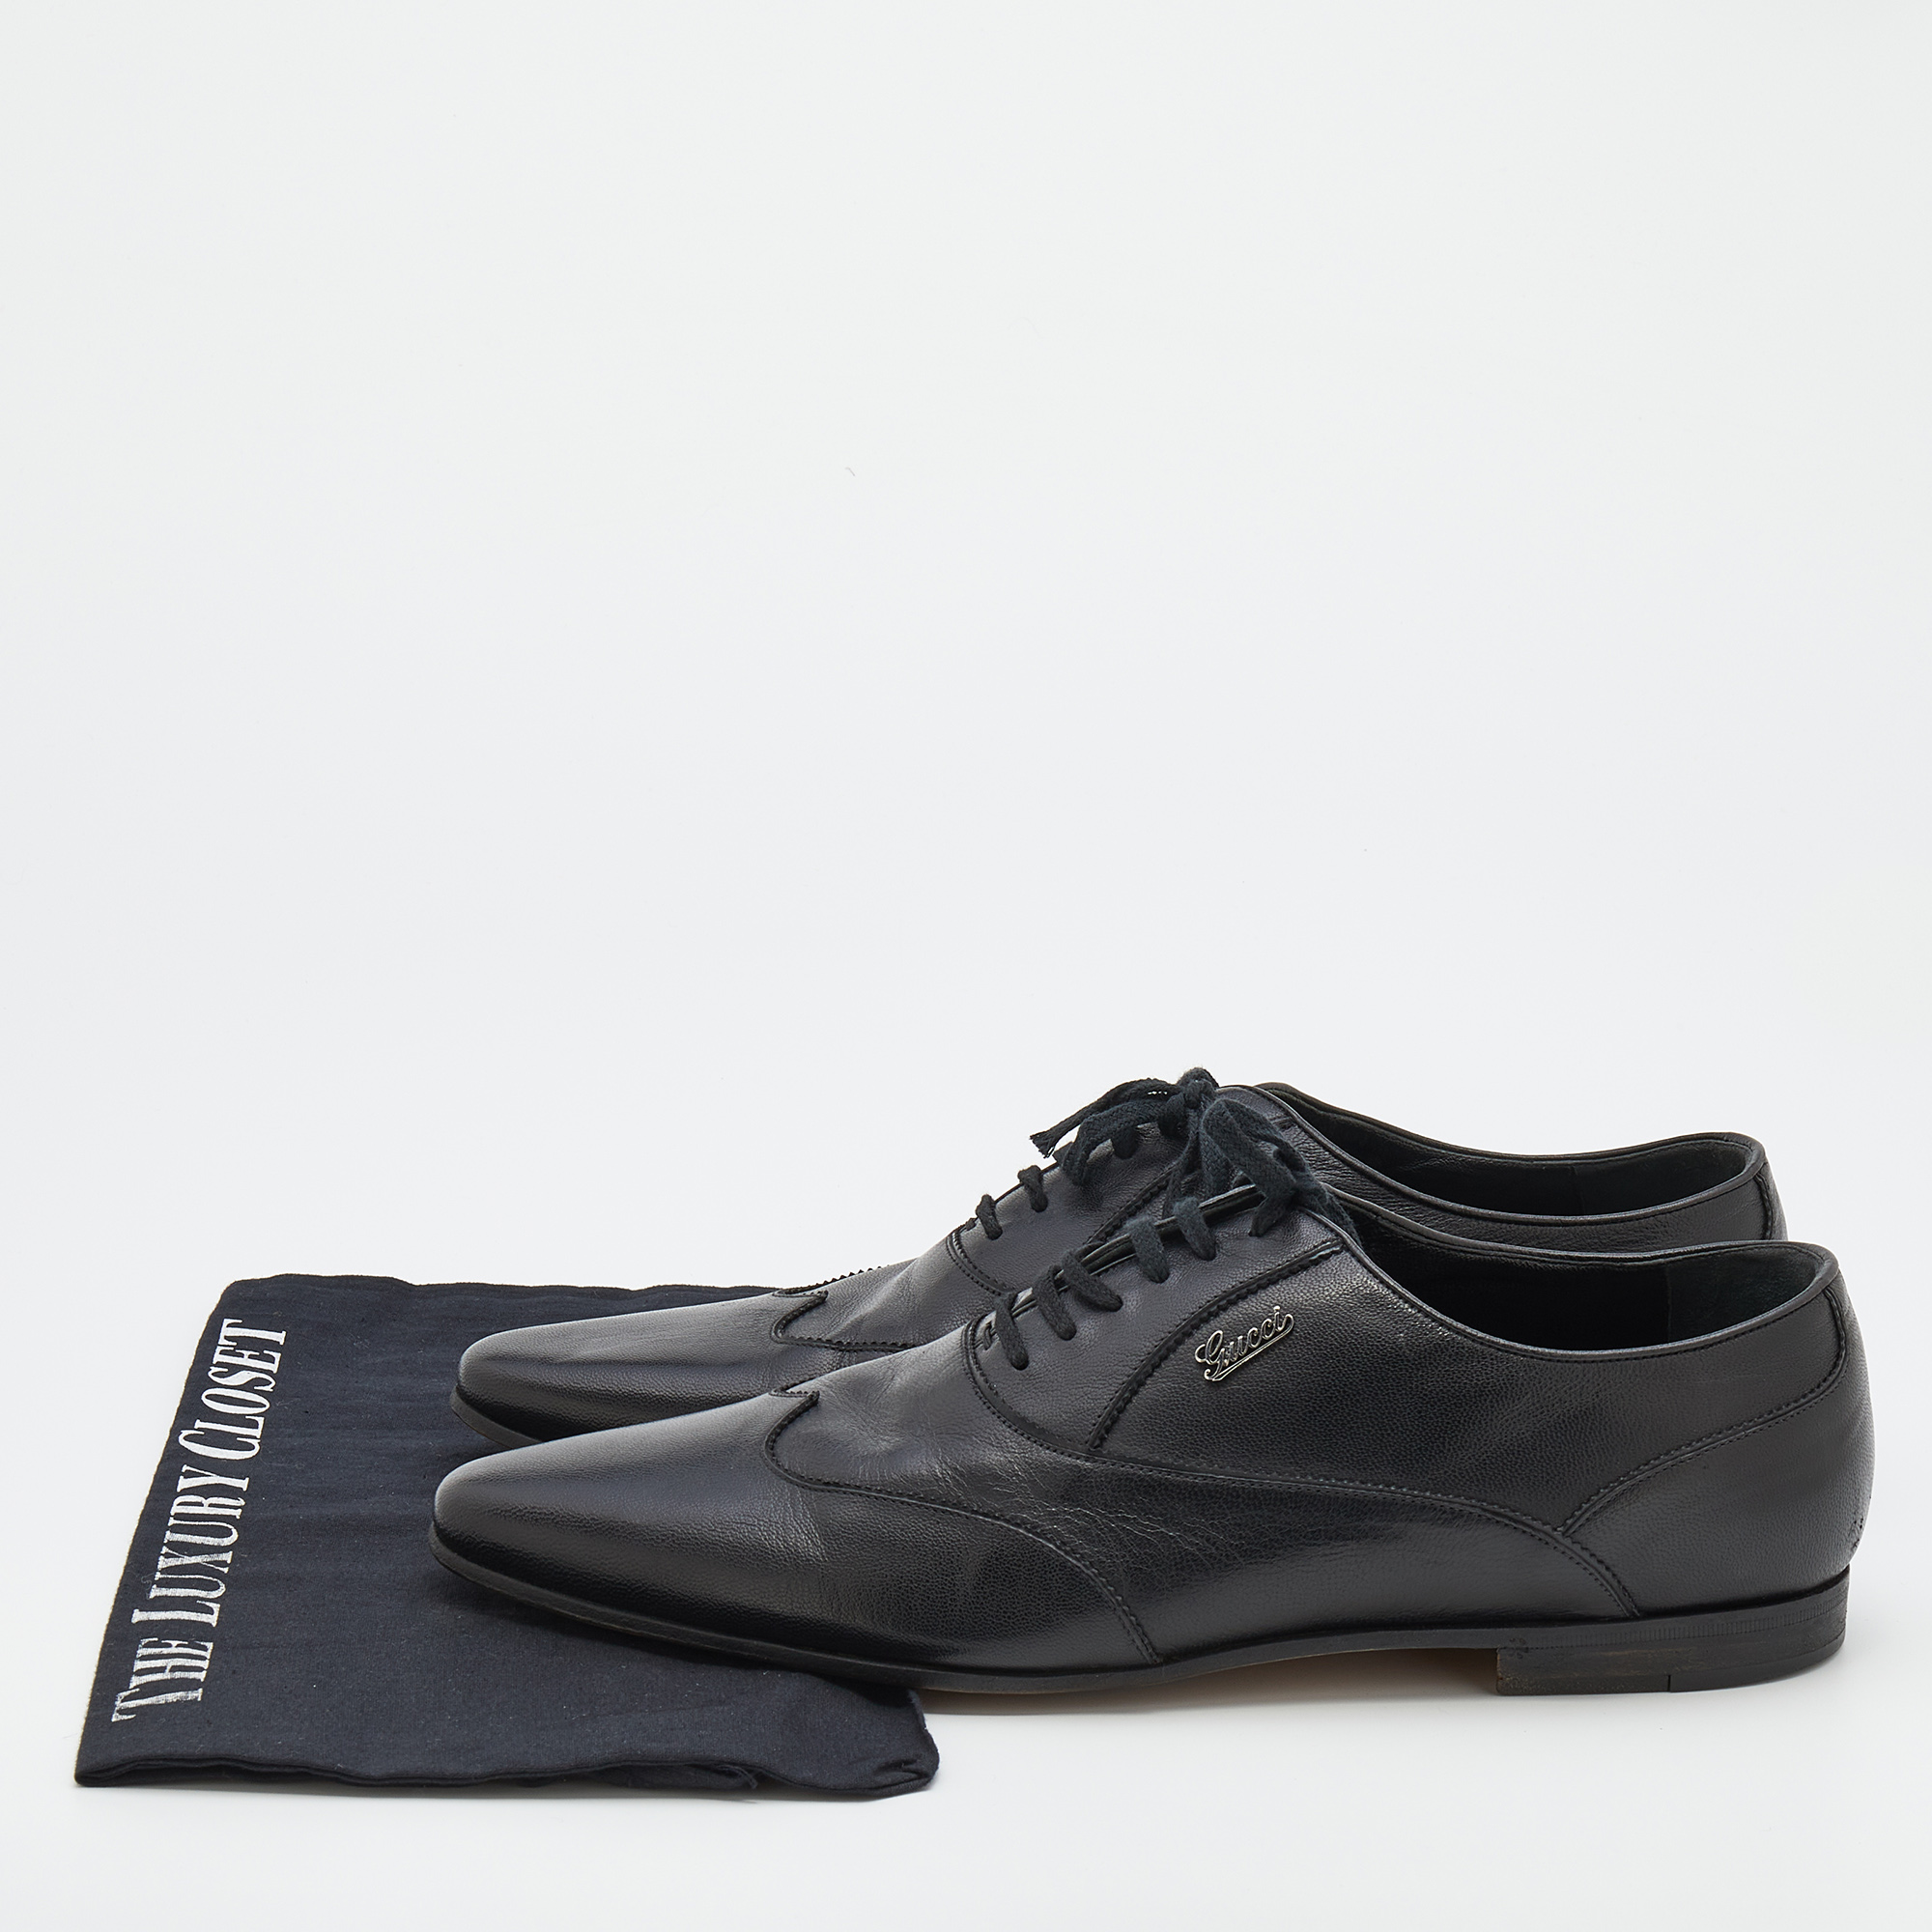 Gucci Black Leather Wingtip Lace Up Oxfords Size 43